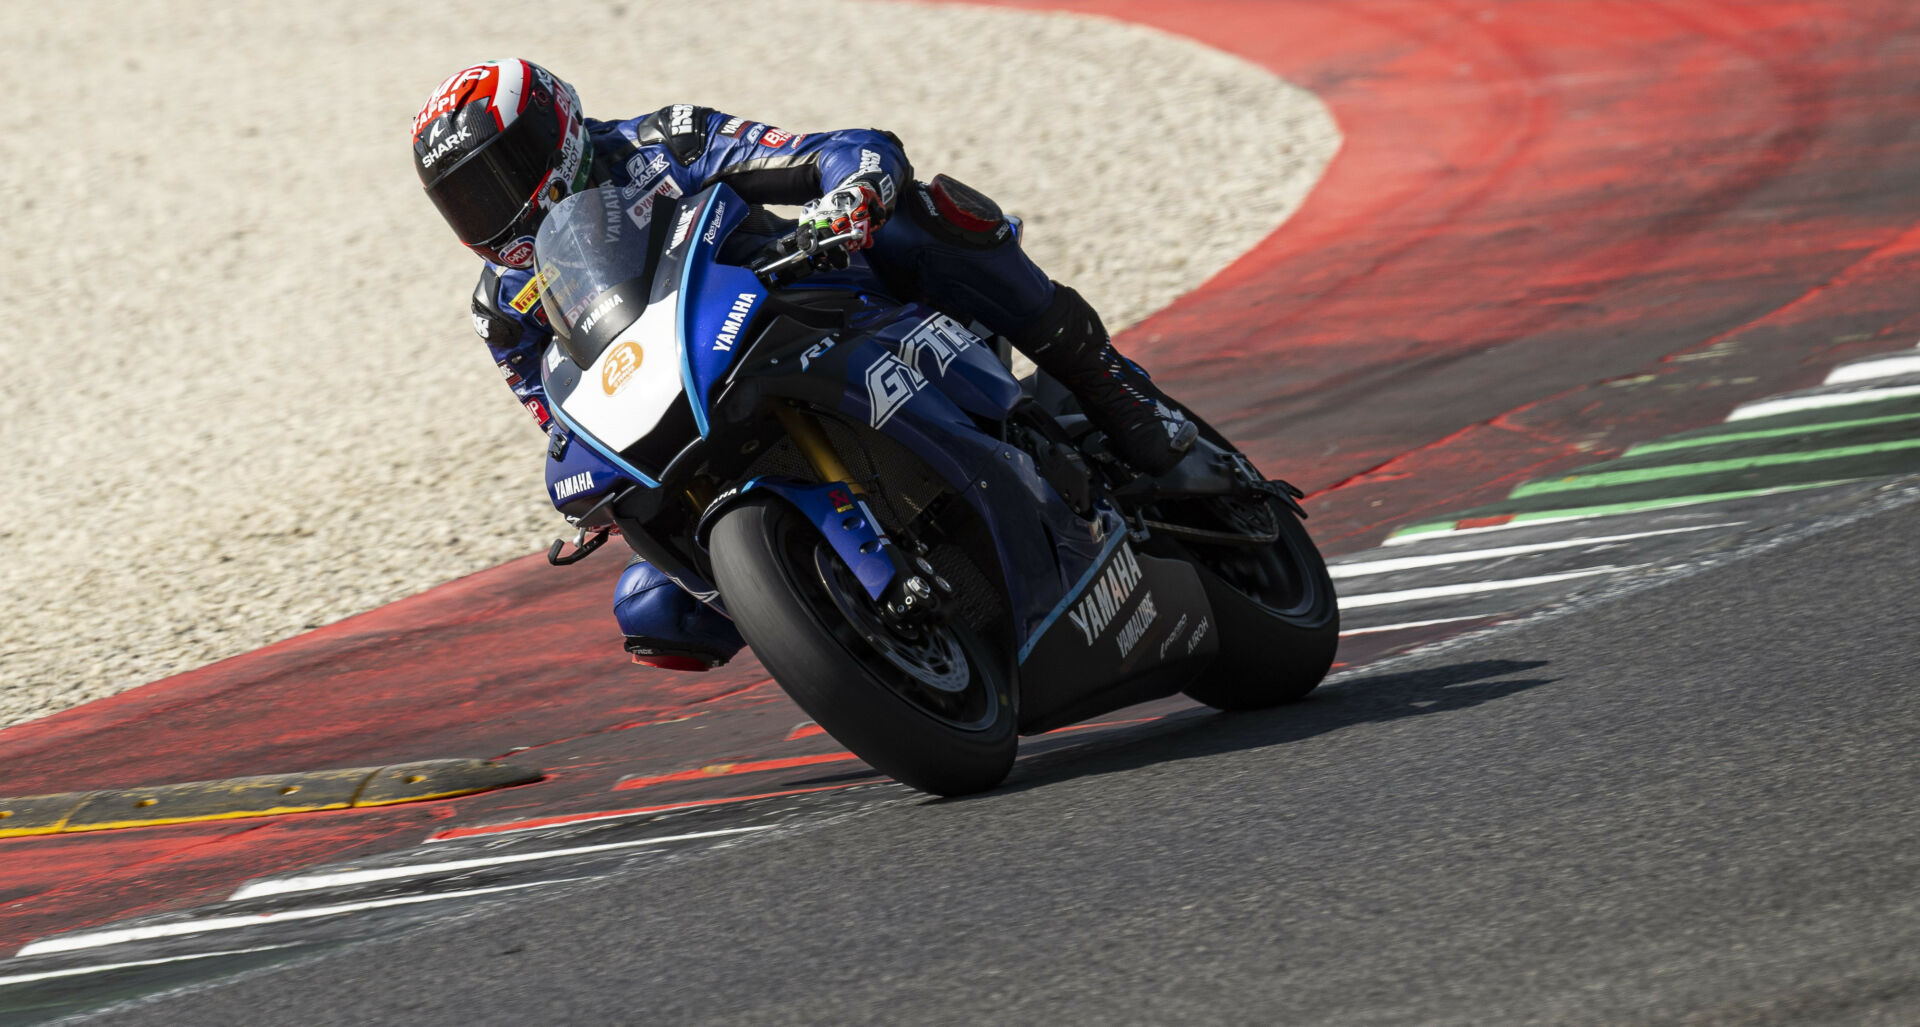 A GYTR-equipped Yamaha YZF-R1 being ridden on a racetrack. Photo courtesy Yamaha Motor Europe.